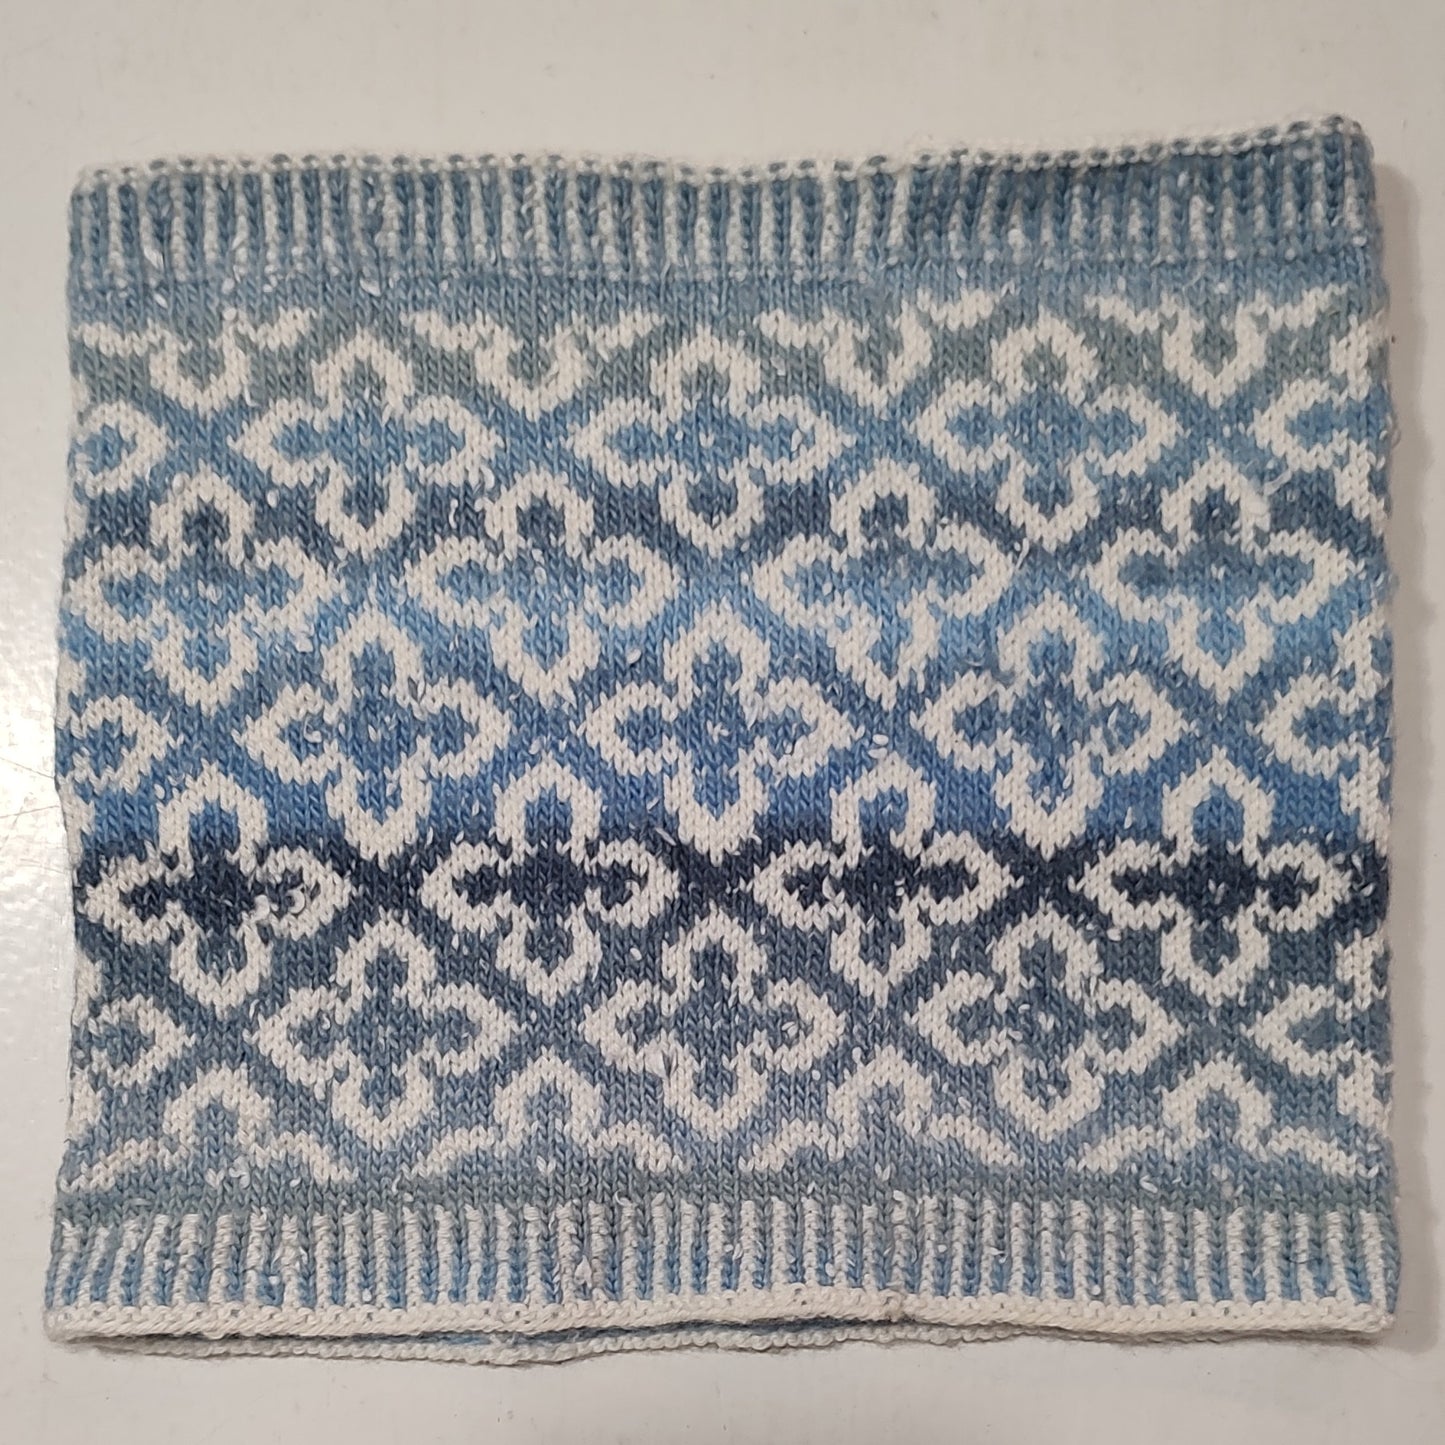 Knitted Cowl - blue and white stranded